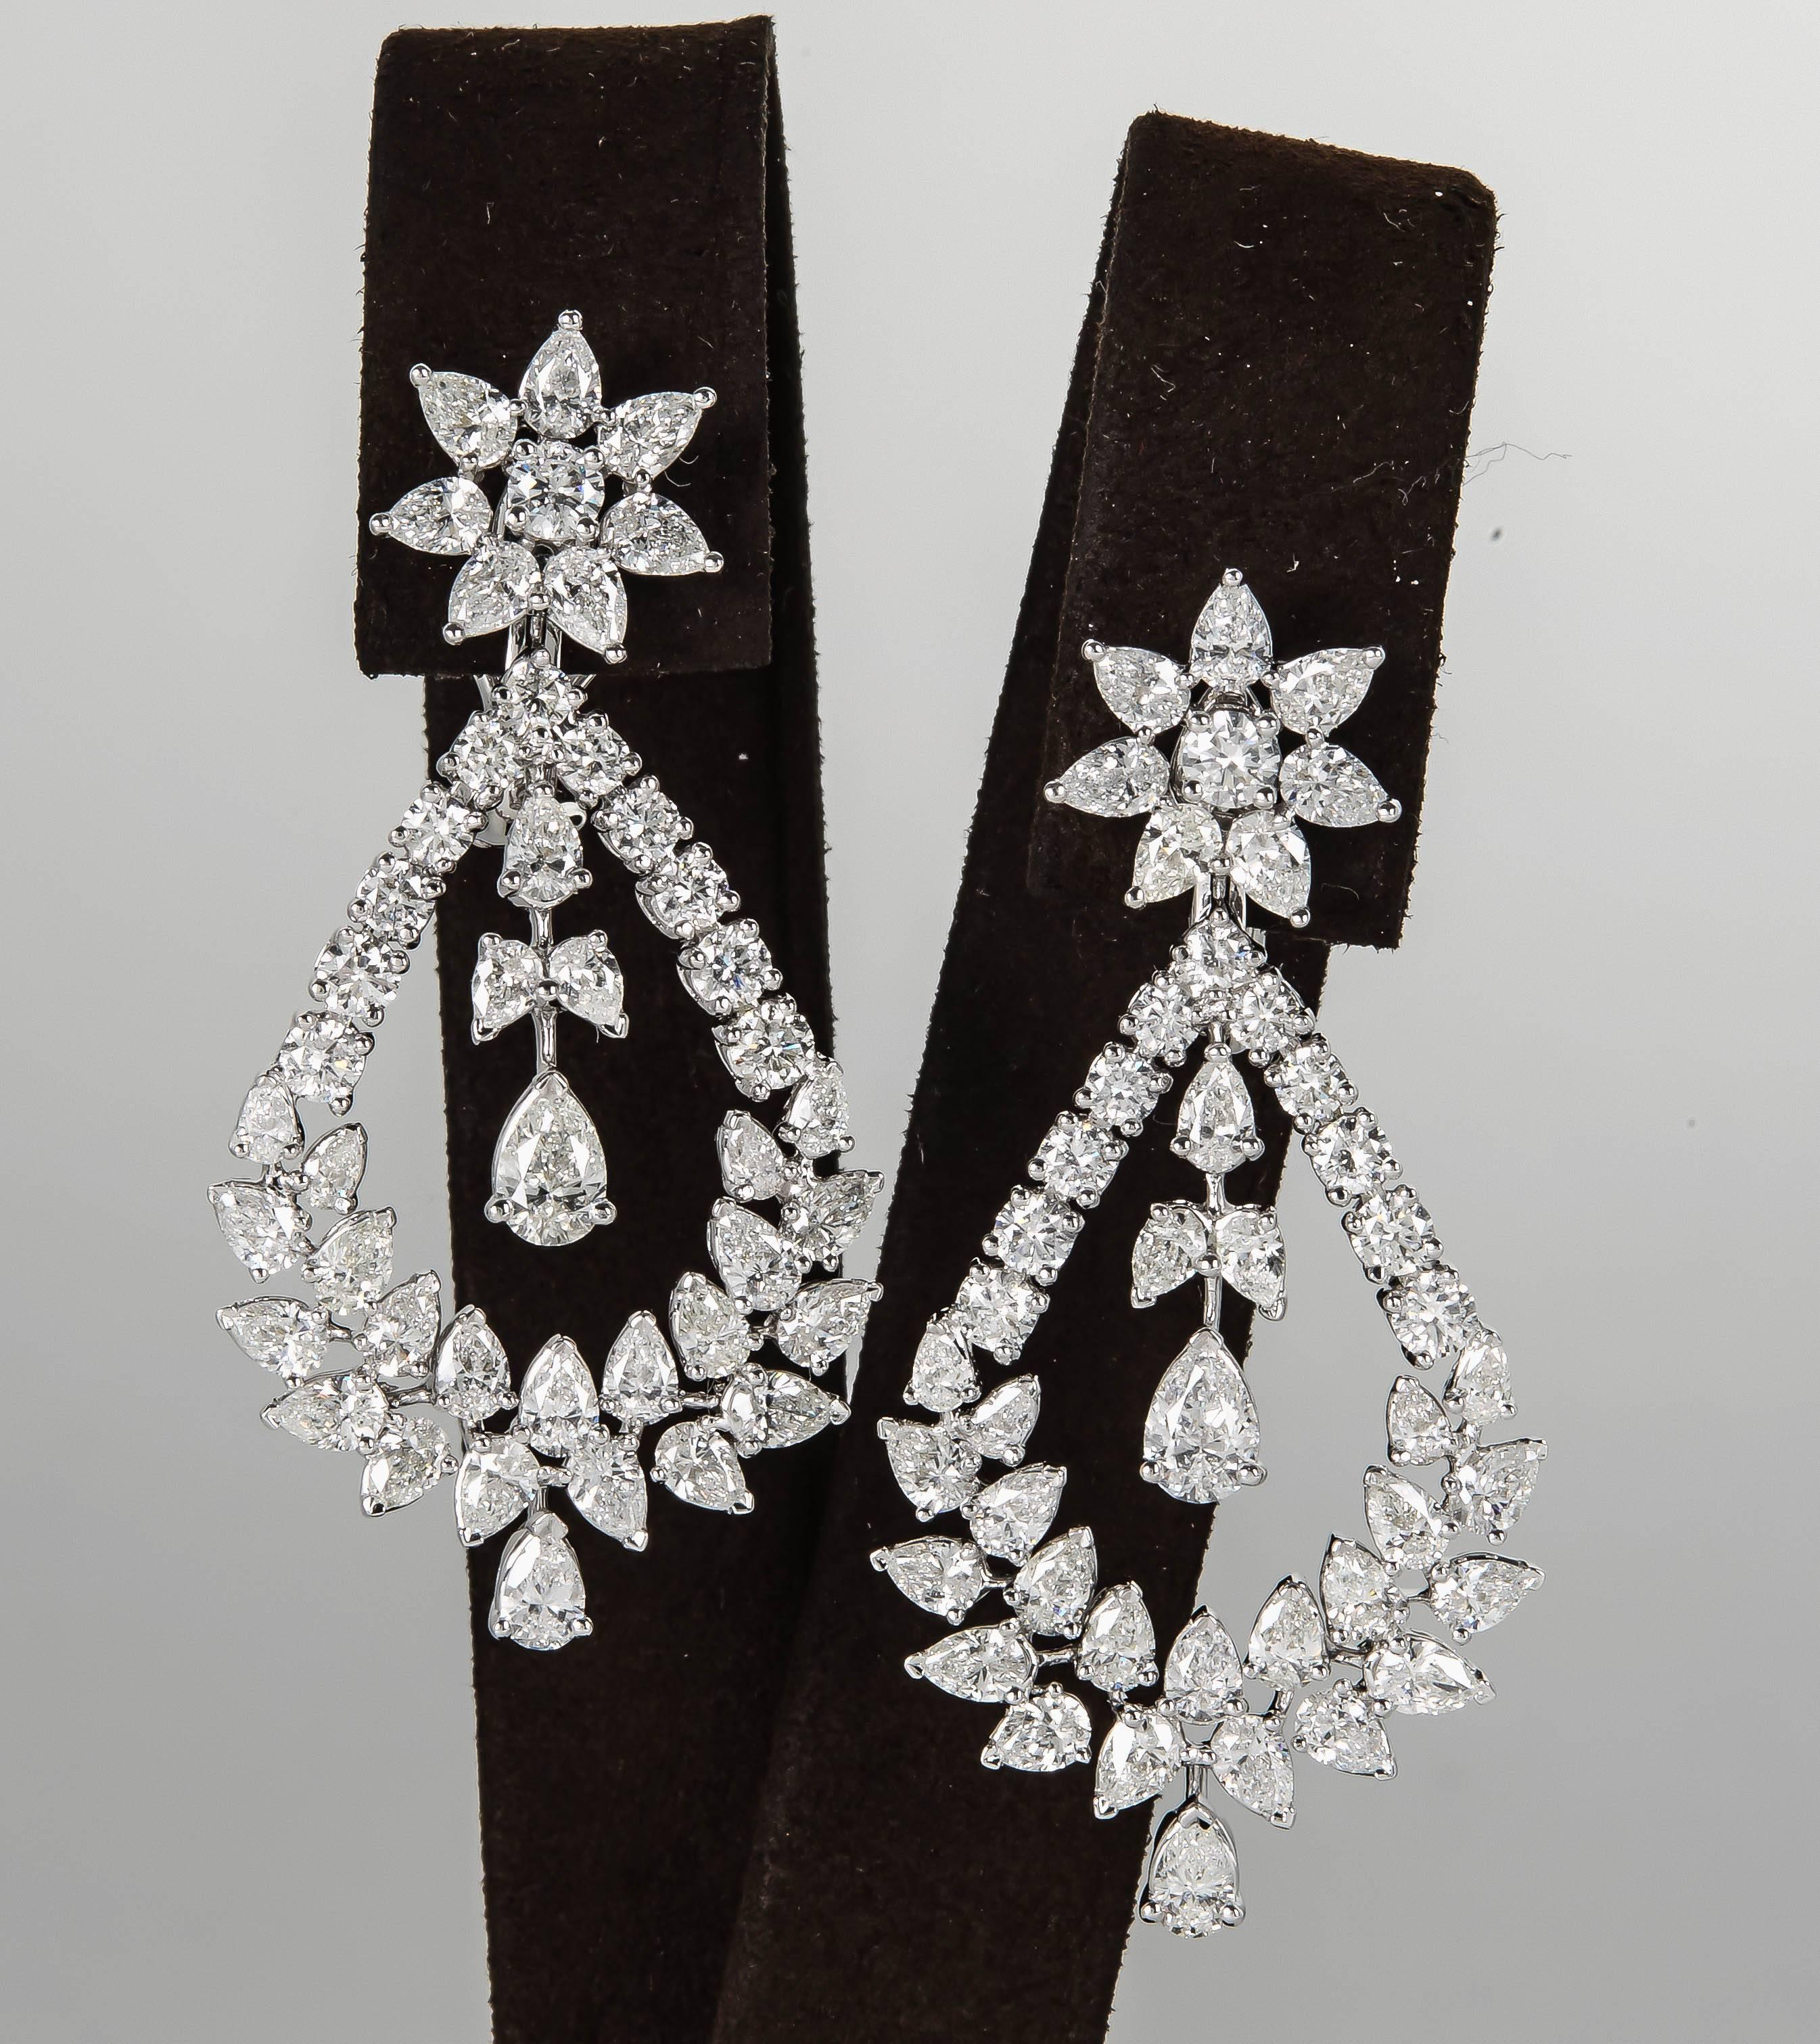 

A unique pair of diamond drop earrings in a timeless design.

11.95 carats of fine round brilliant and pear cut diamonds set in 18k white gold.

This earring measures approximately 2 inches from top to bottom.